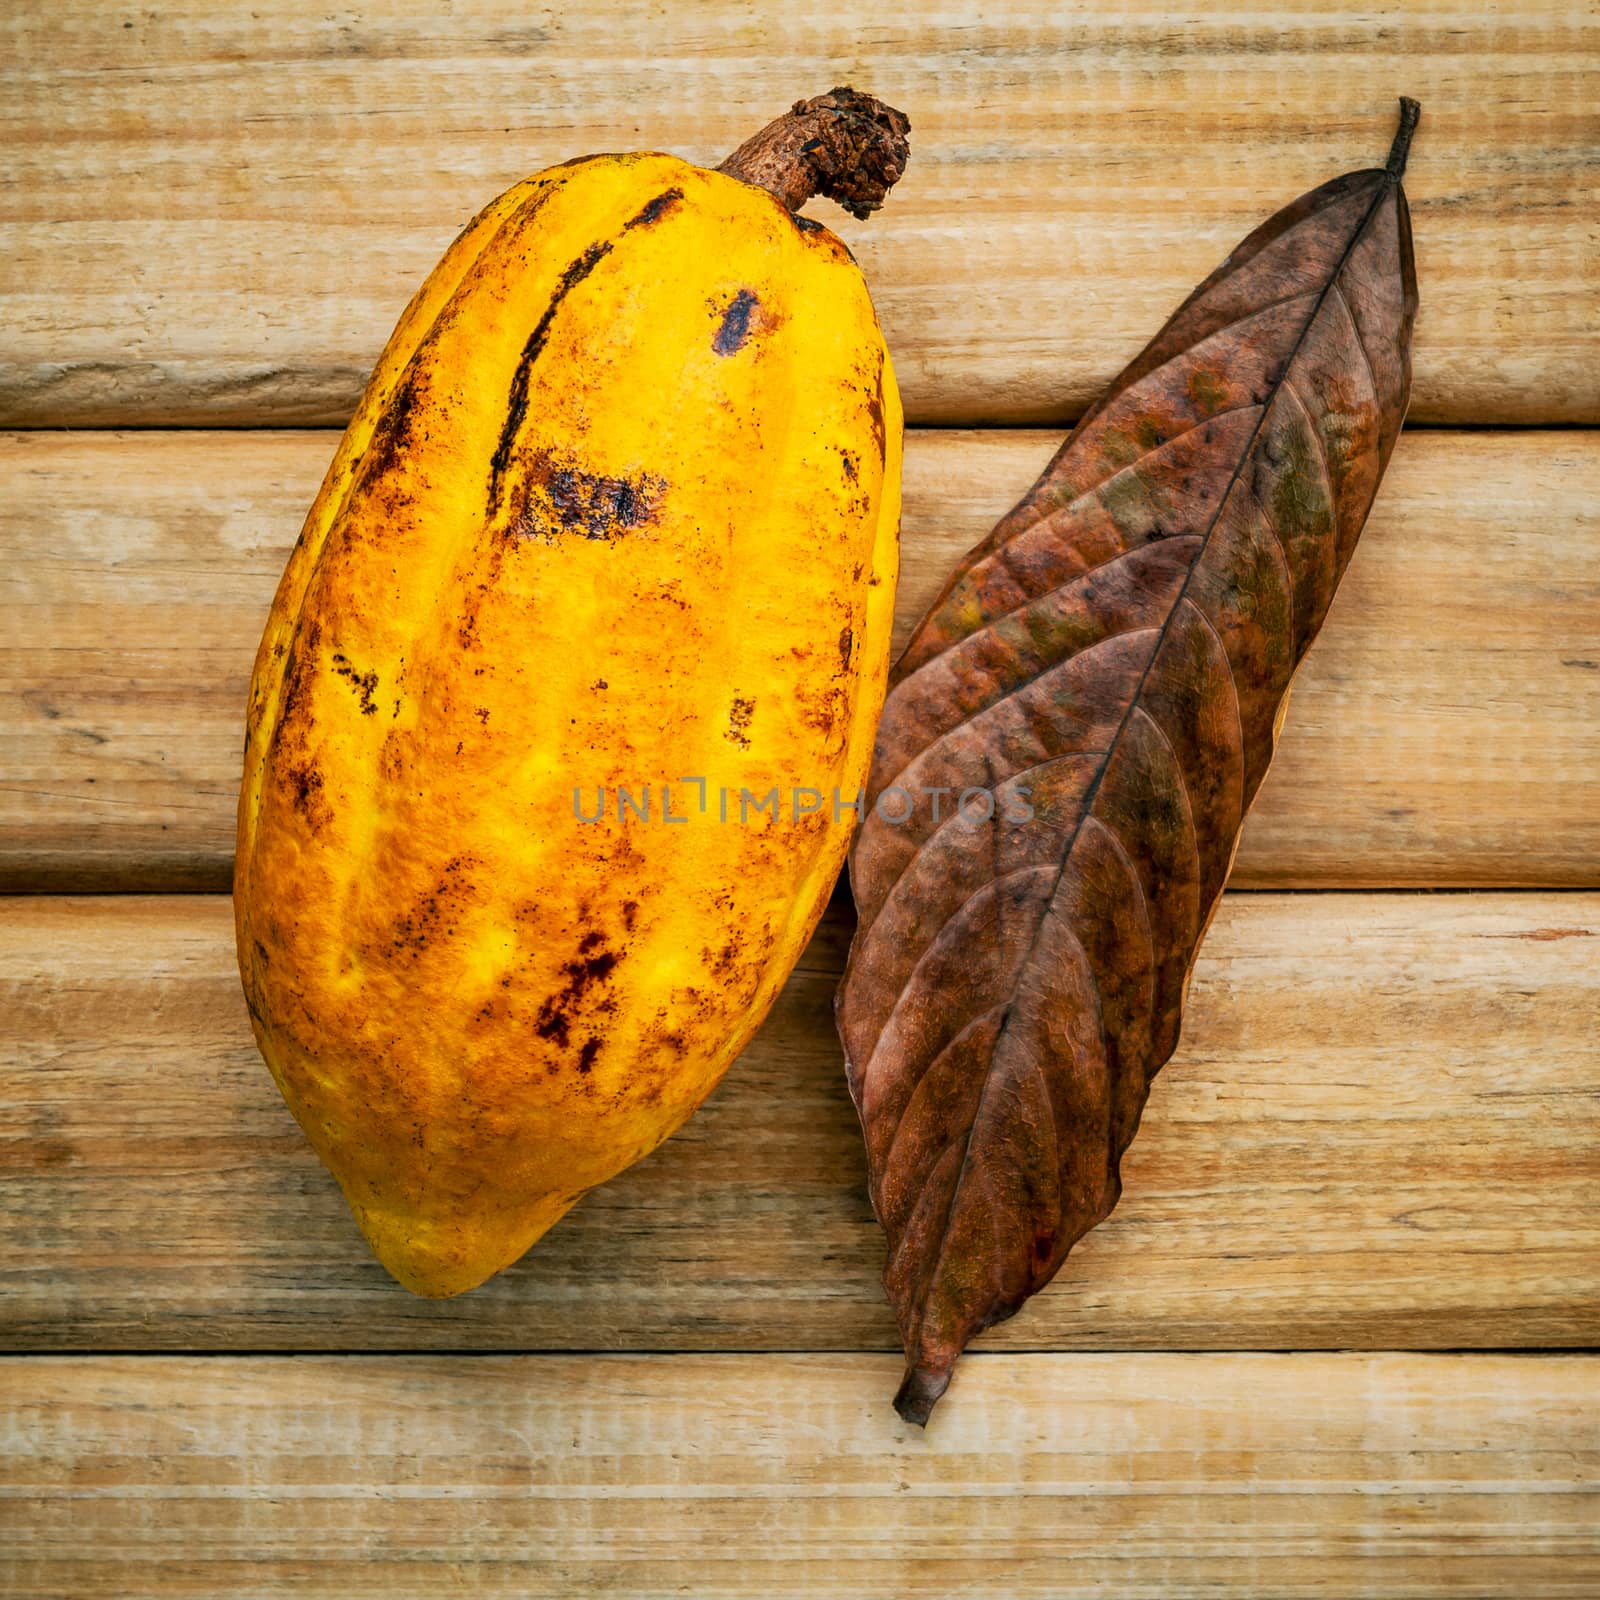 Ripe Indonesia's cocoa  setup on rustic wooden background.